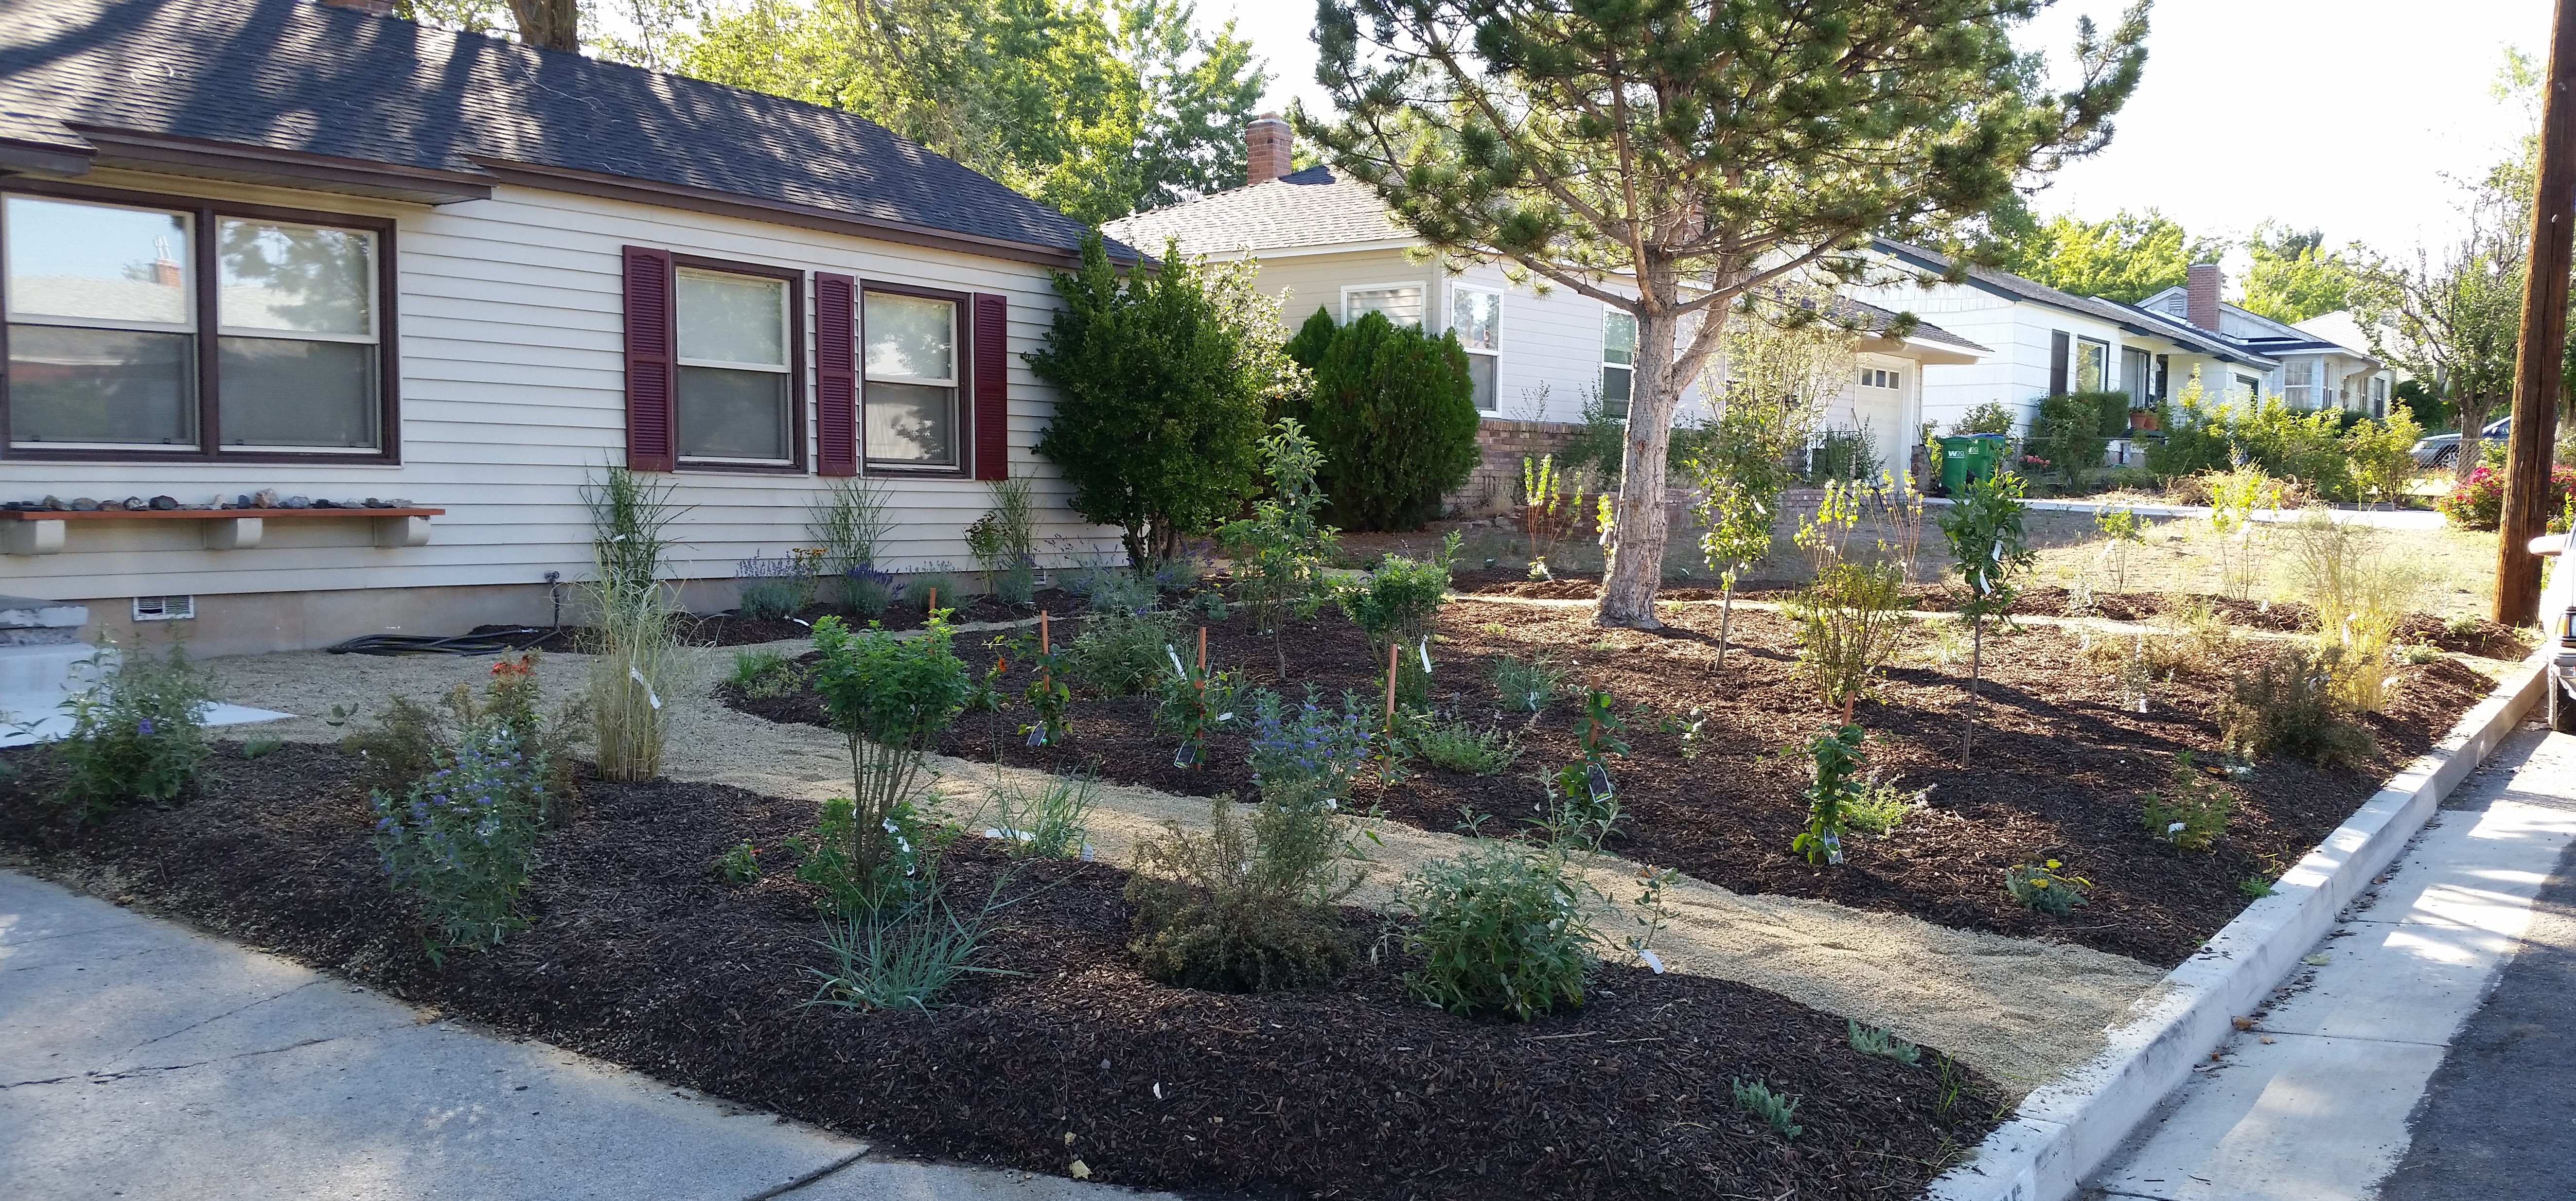 Xeriscape Nevada Drought Prevention, Diy Drought Resistant Landscaping